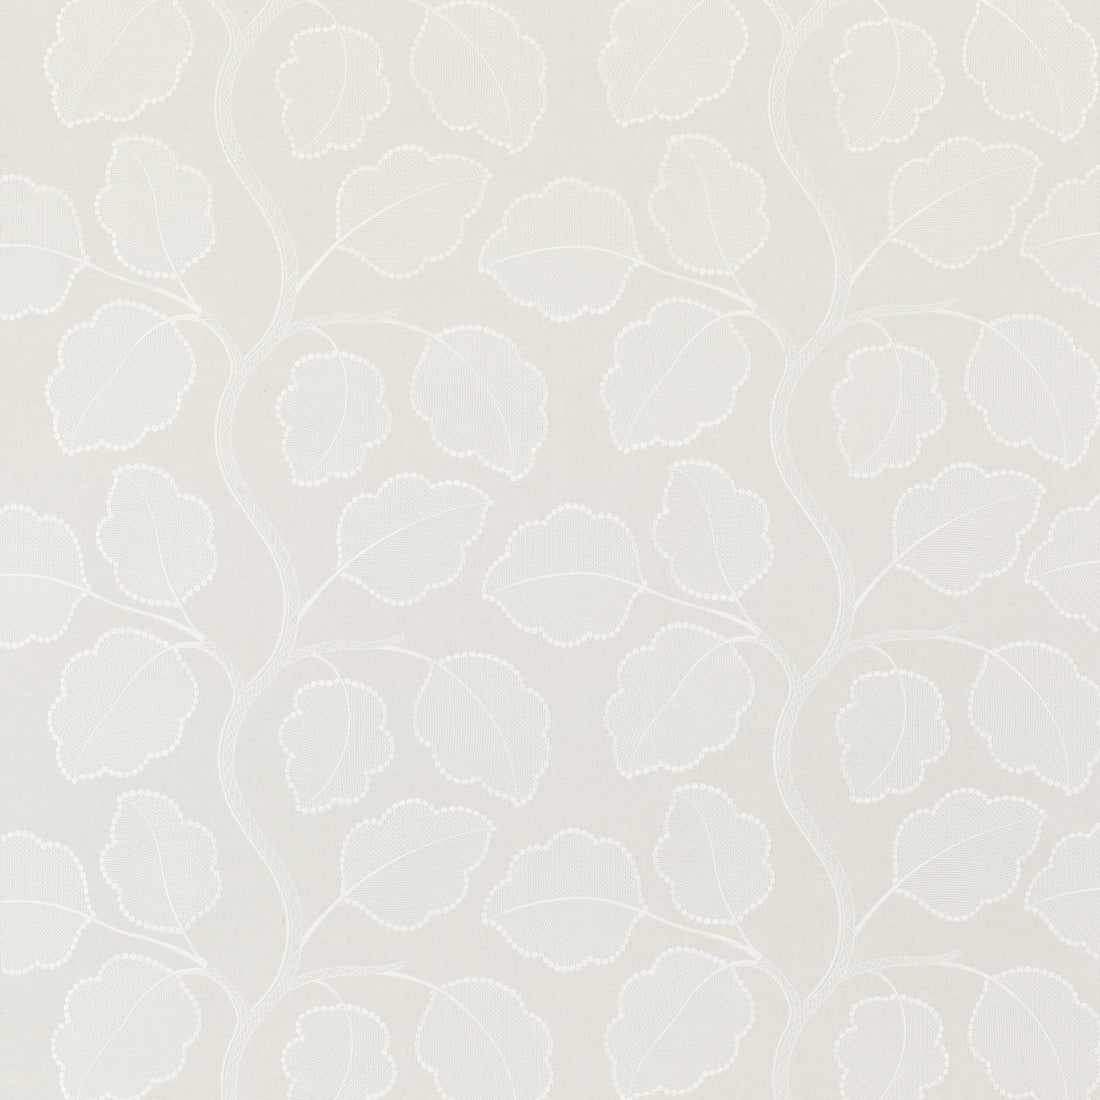 Chestnut Tree Embroidery fabric in white color - pattern number AW9121 - by Anna French in the Natural Glimmer collection